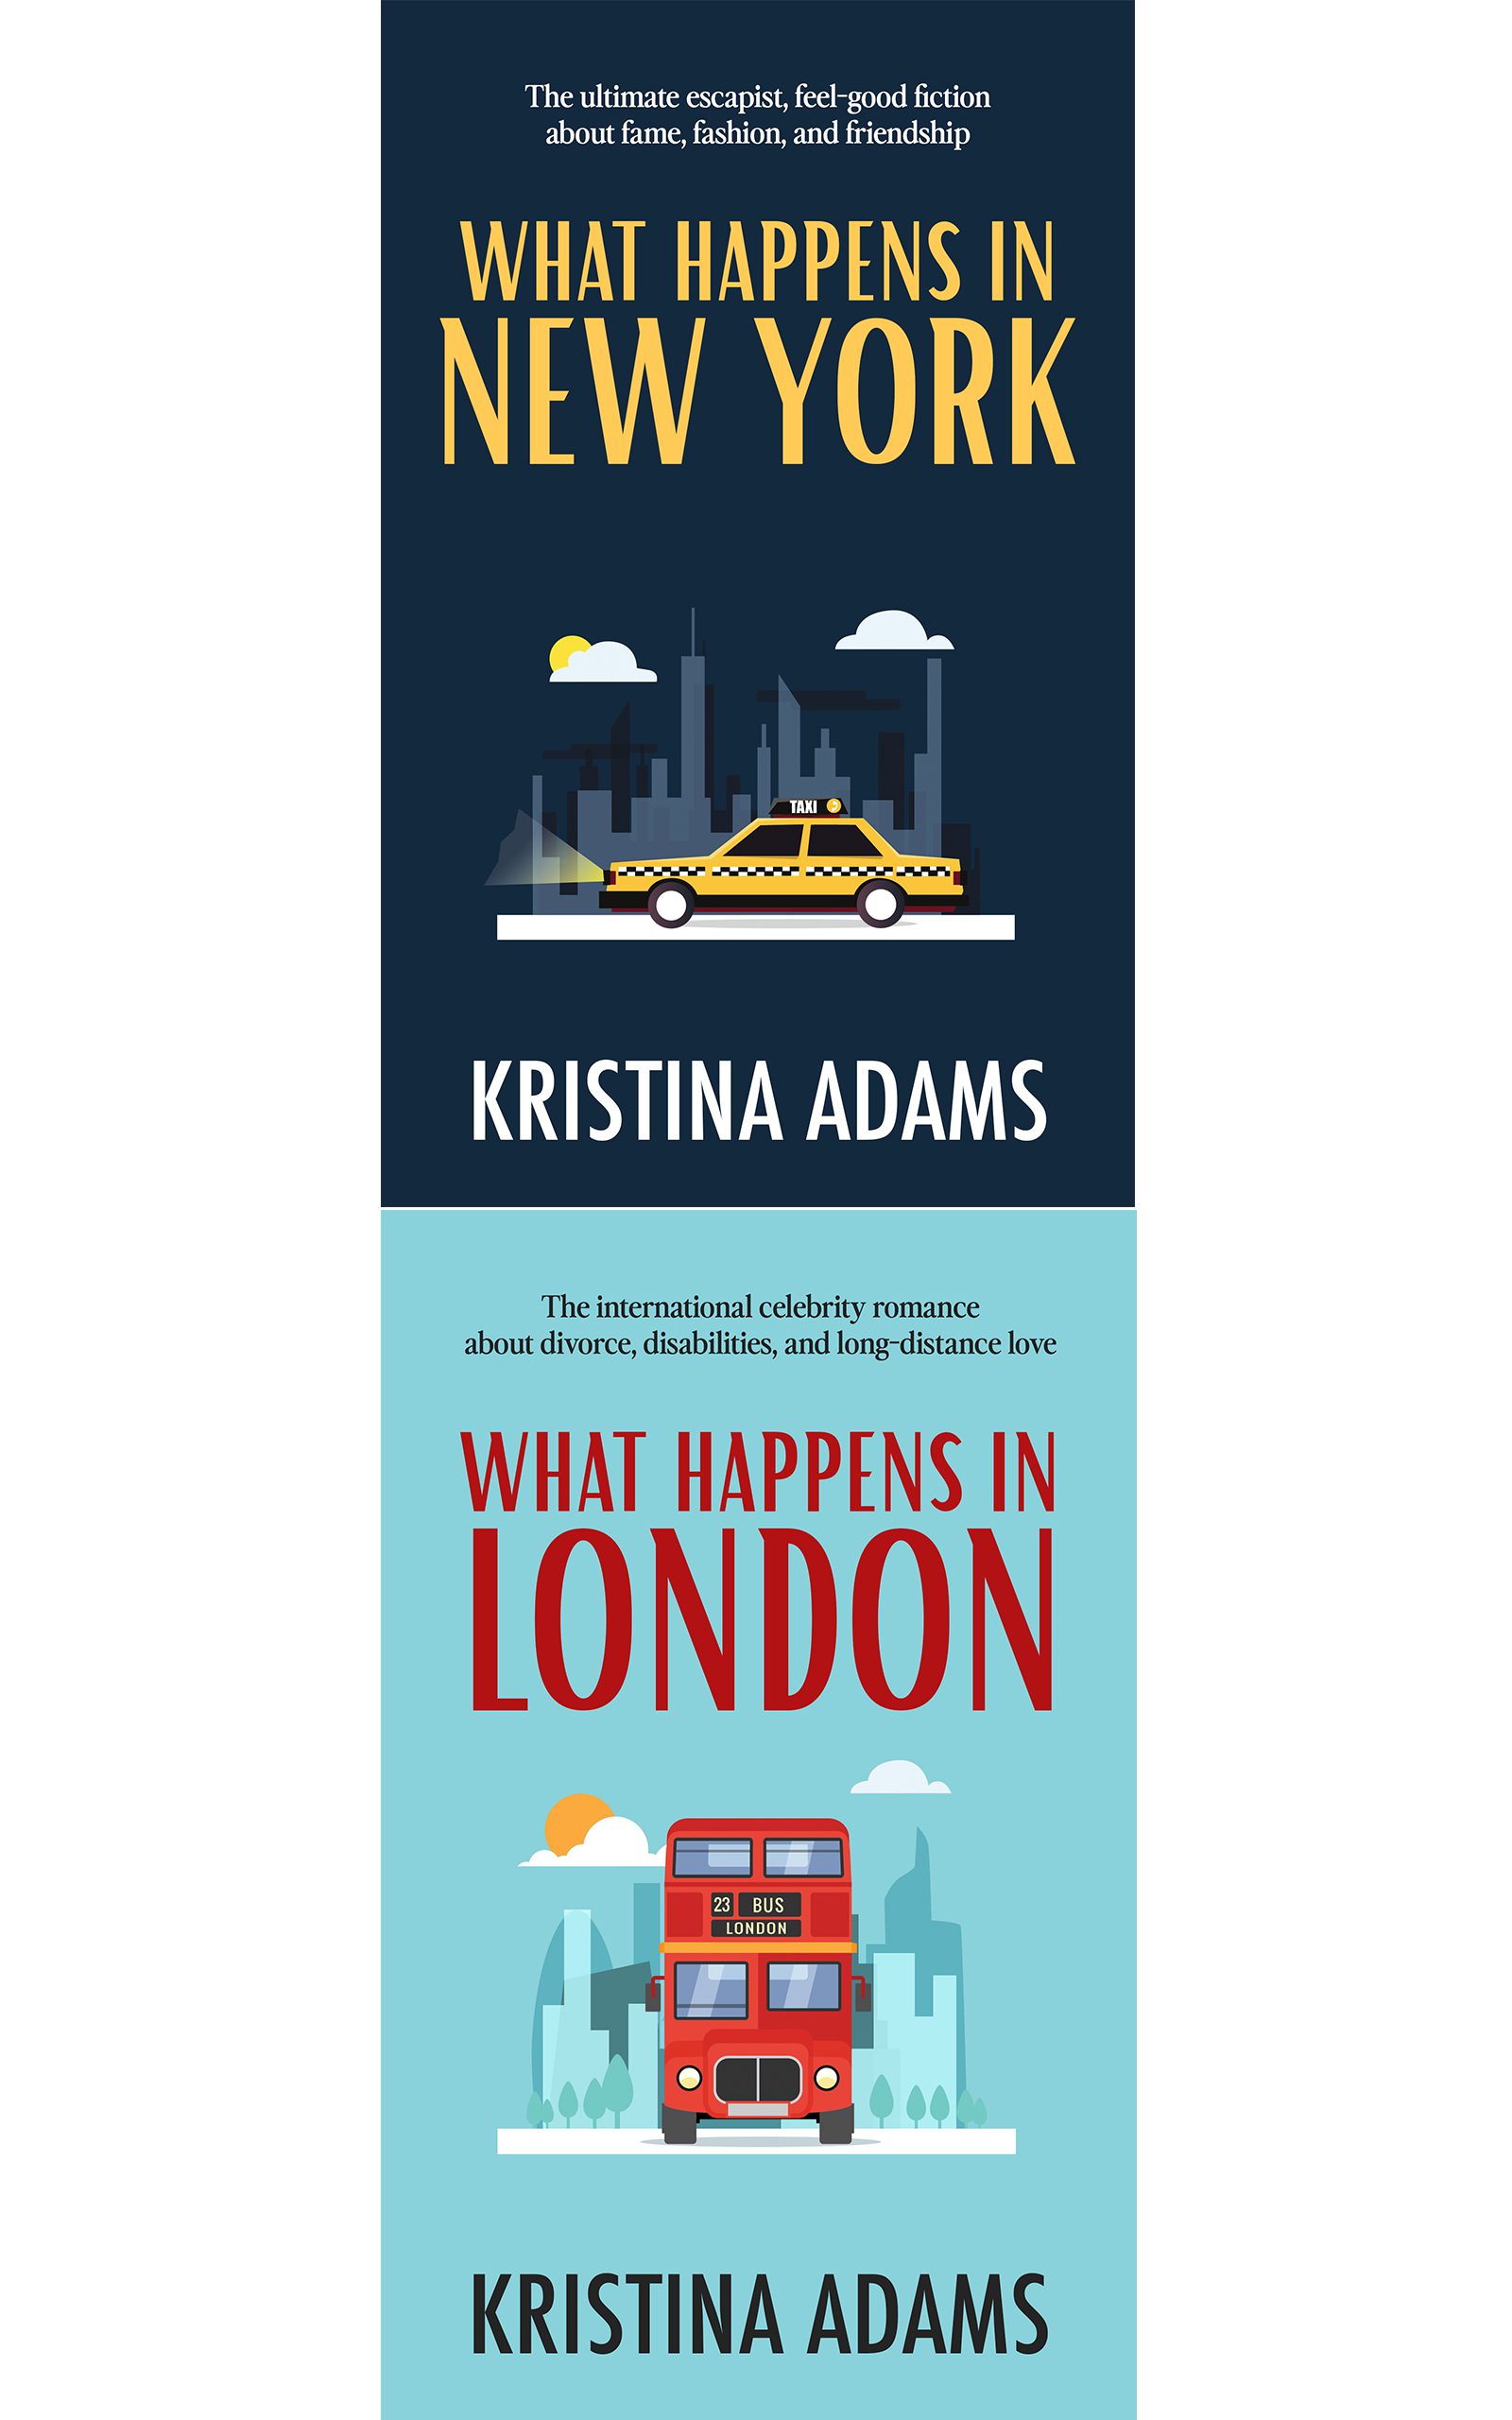 What Happens in New York and What Happens in London covers